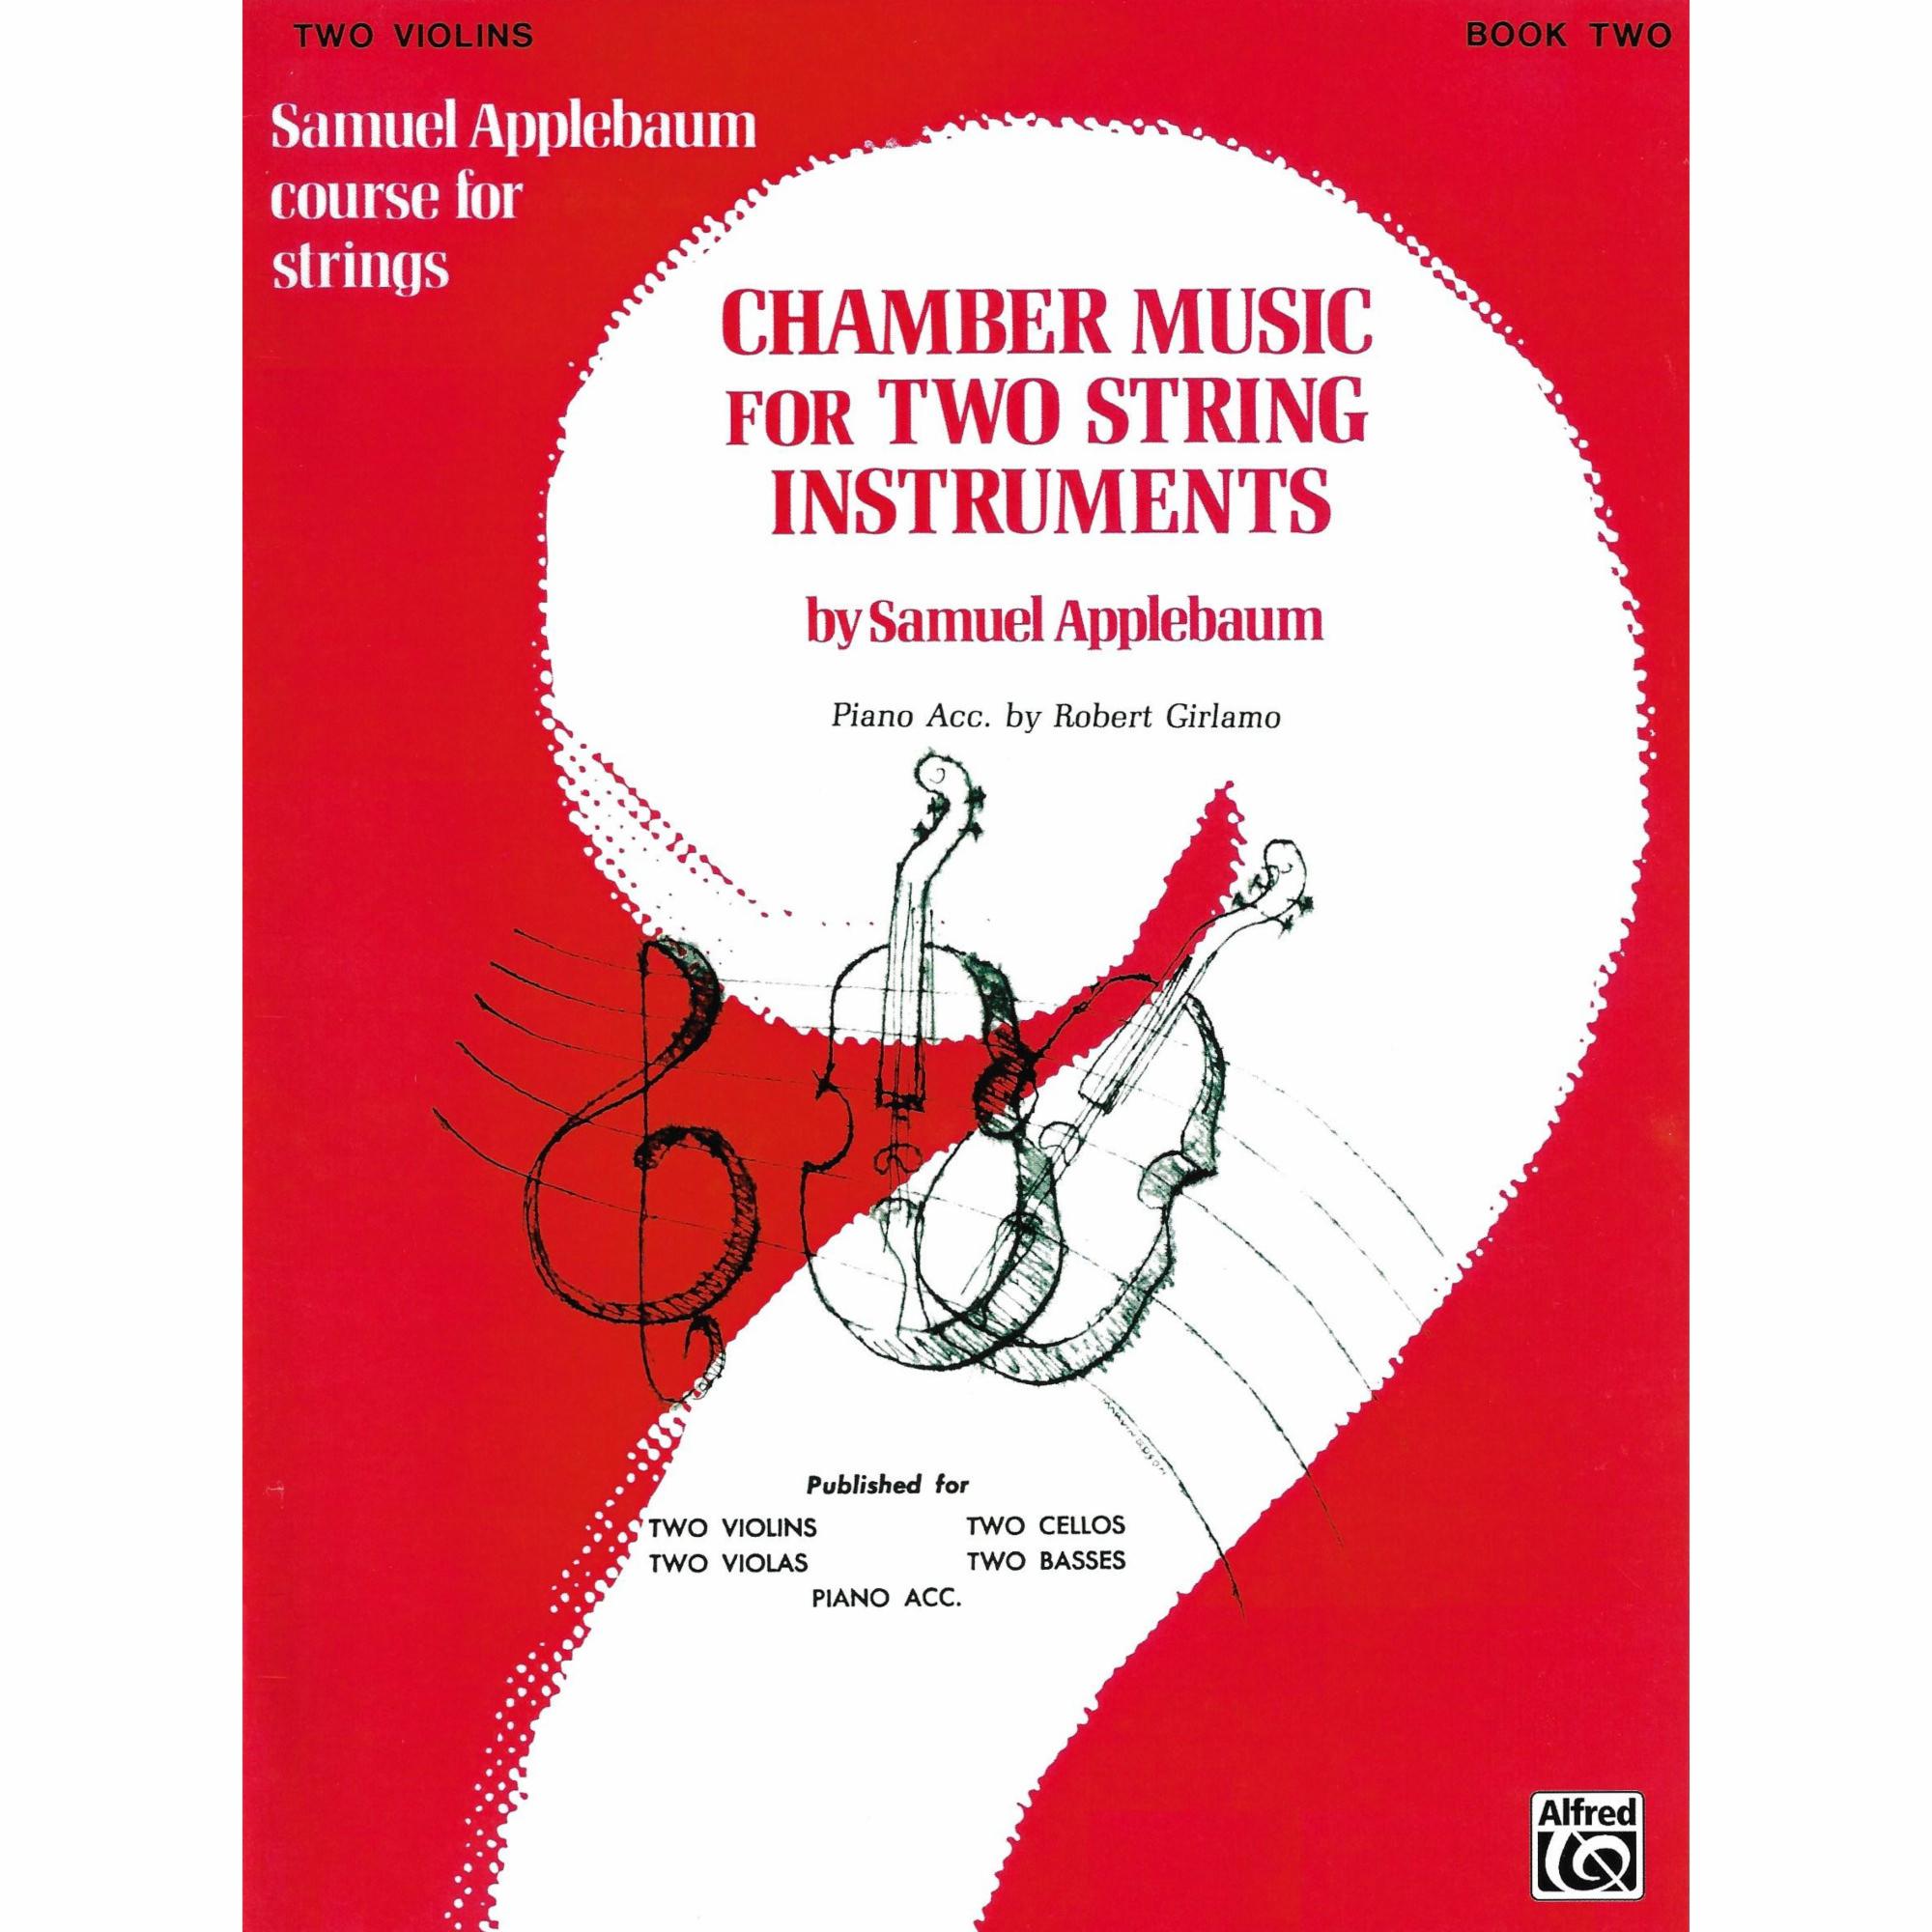 Chamber Music for Two String Instruments, Book 2